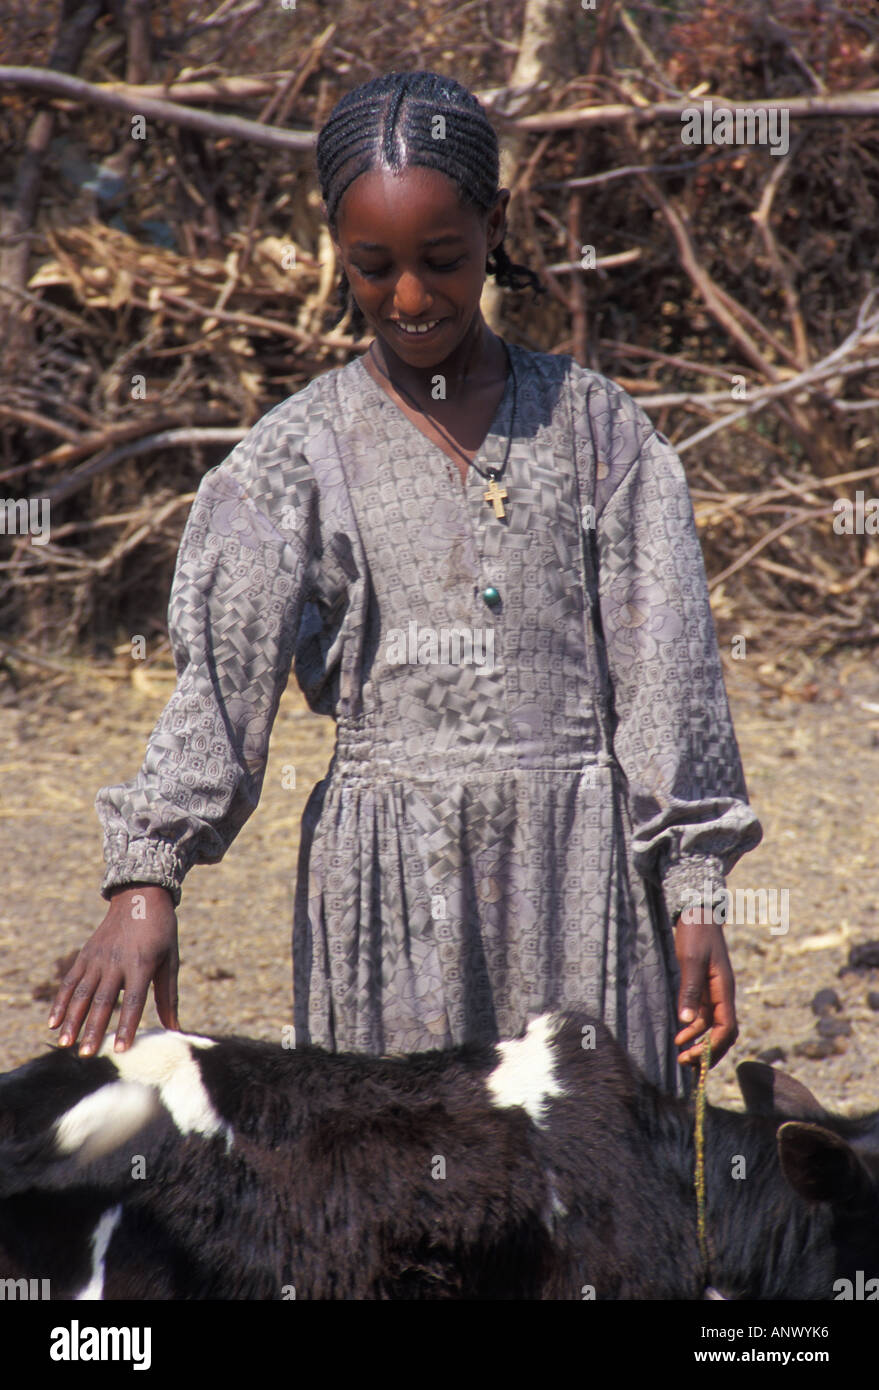 Africa, Ethiopia, Young African girl looking after the livestock in an Oromo village Stock Photo